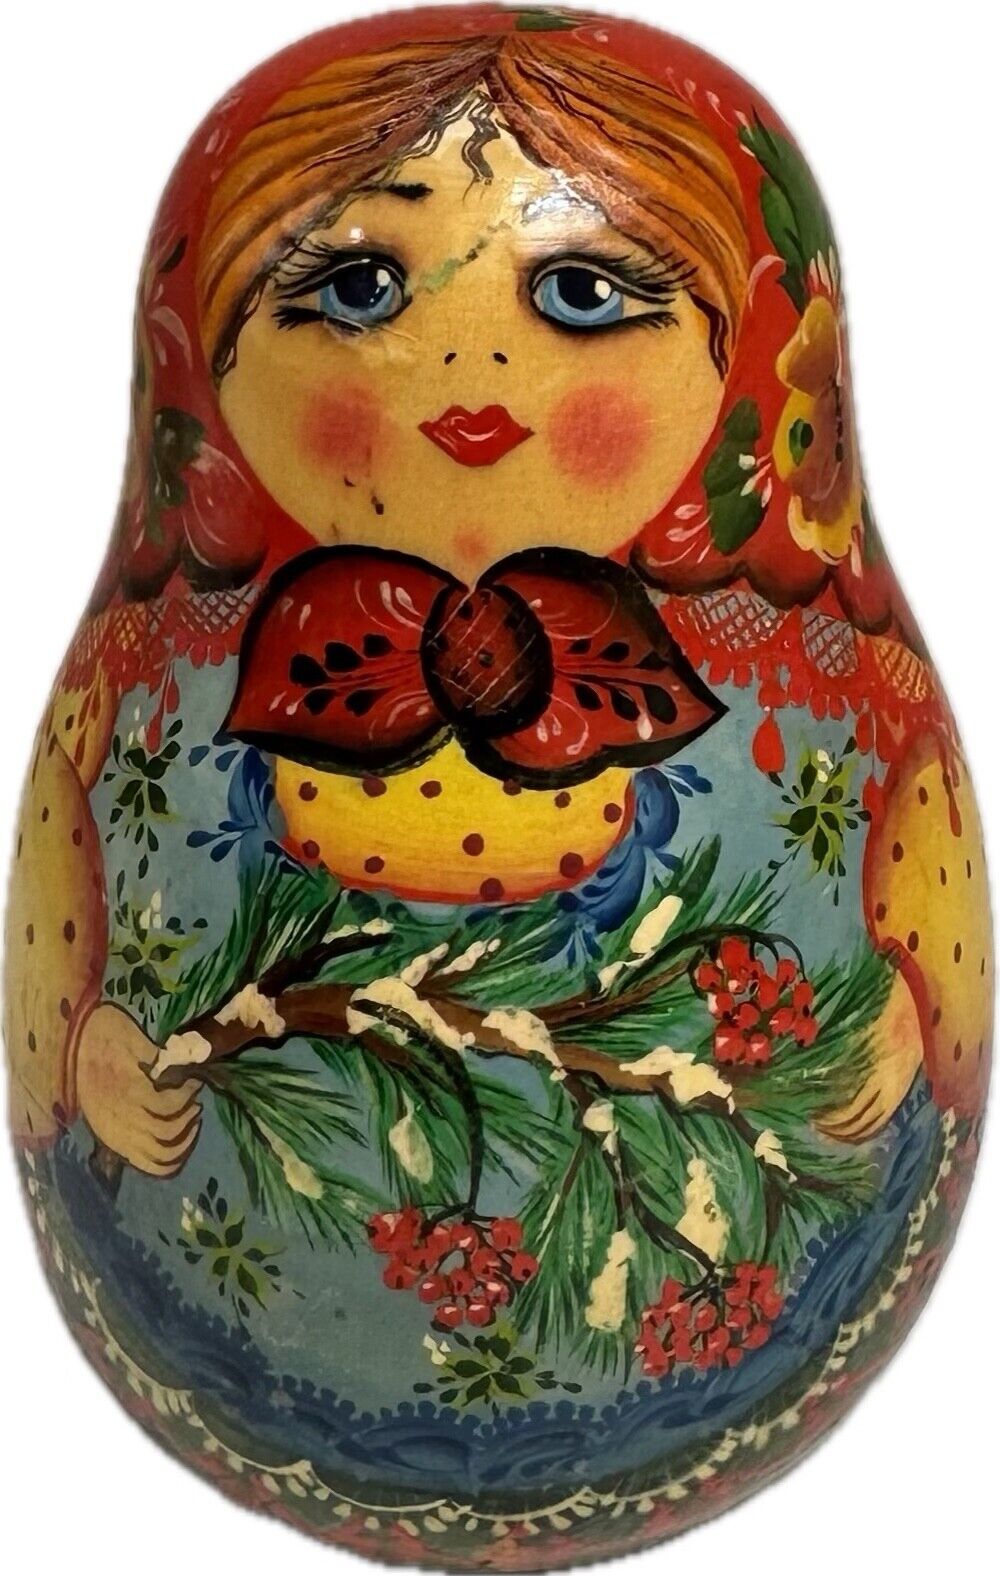 VTG. RUSSIAN ROLY-POLY WOODEN MATRYOSHKA HAND-MADE MUSICAL TOY w/ JINGLE, 4-1/2”